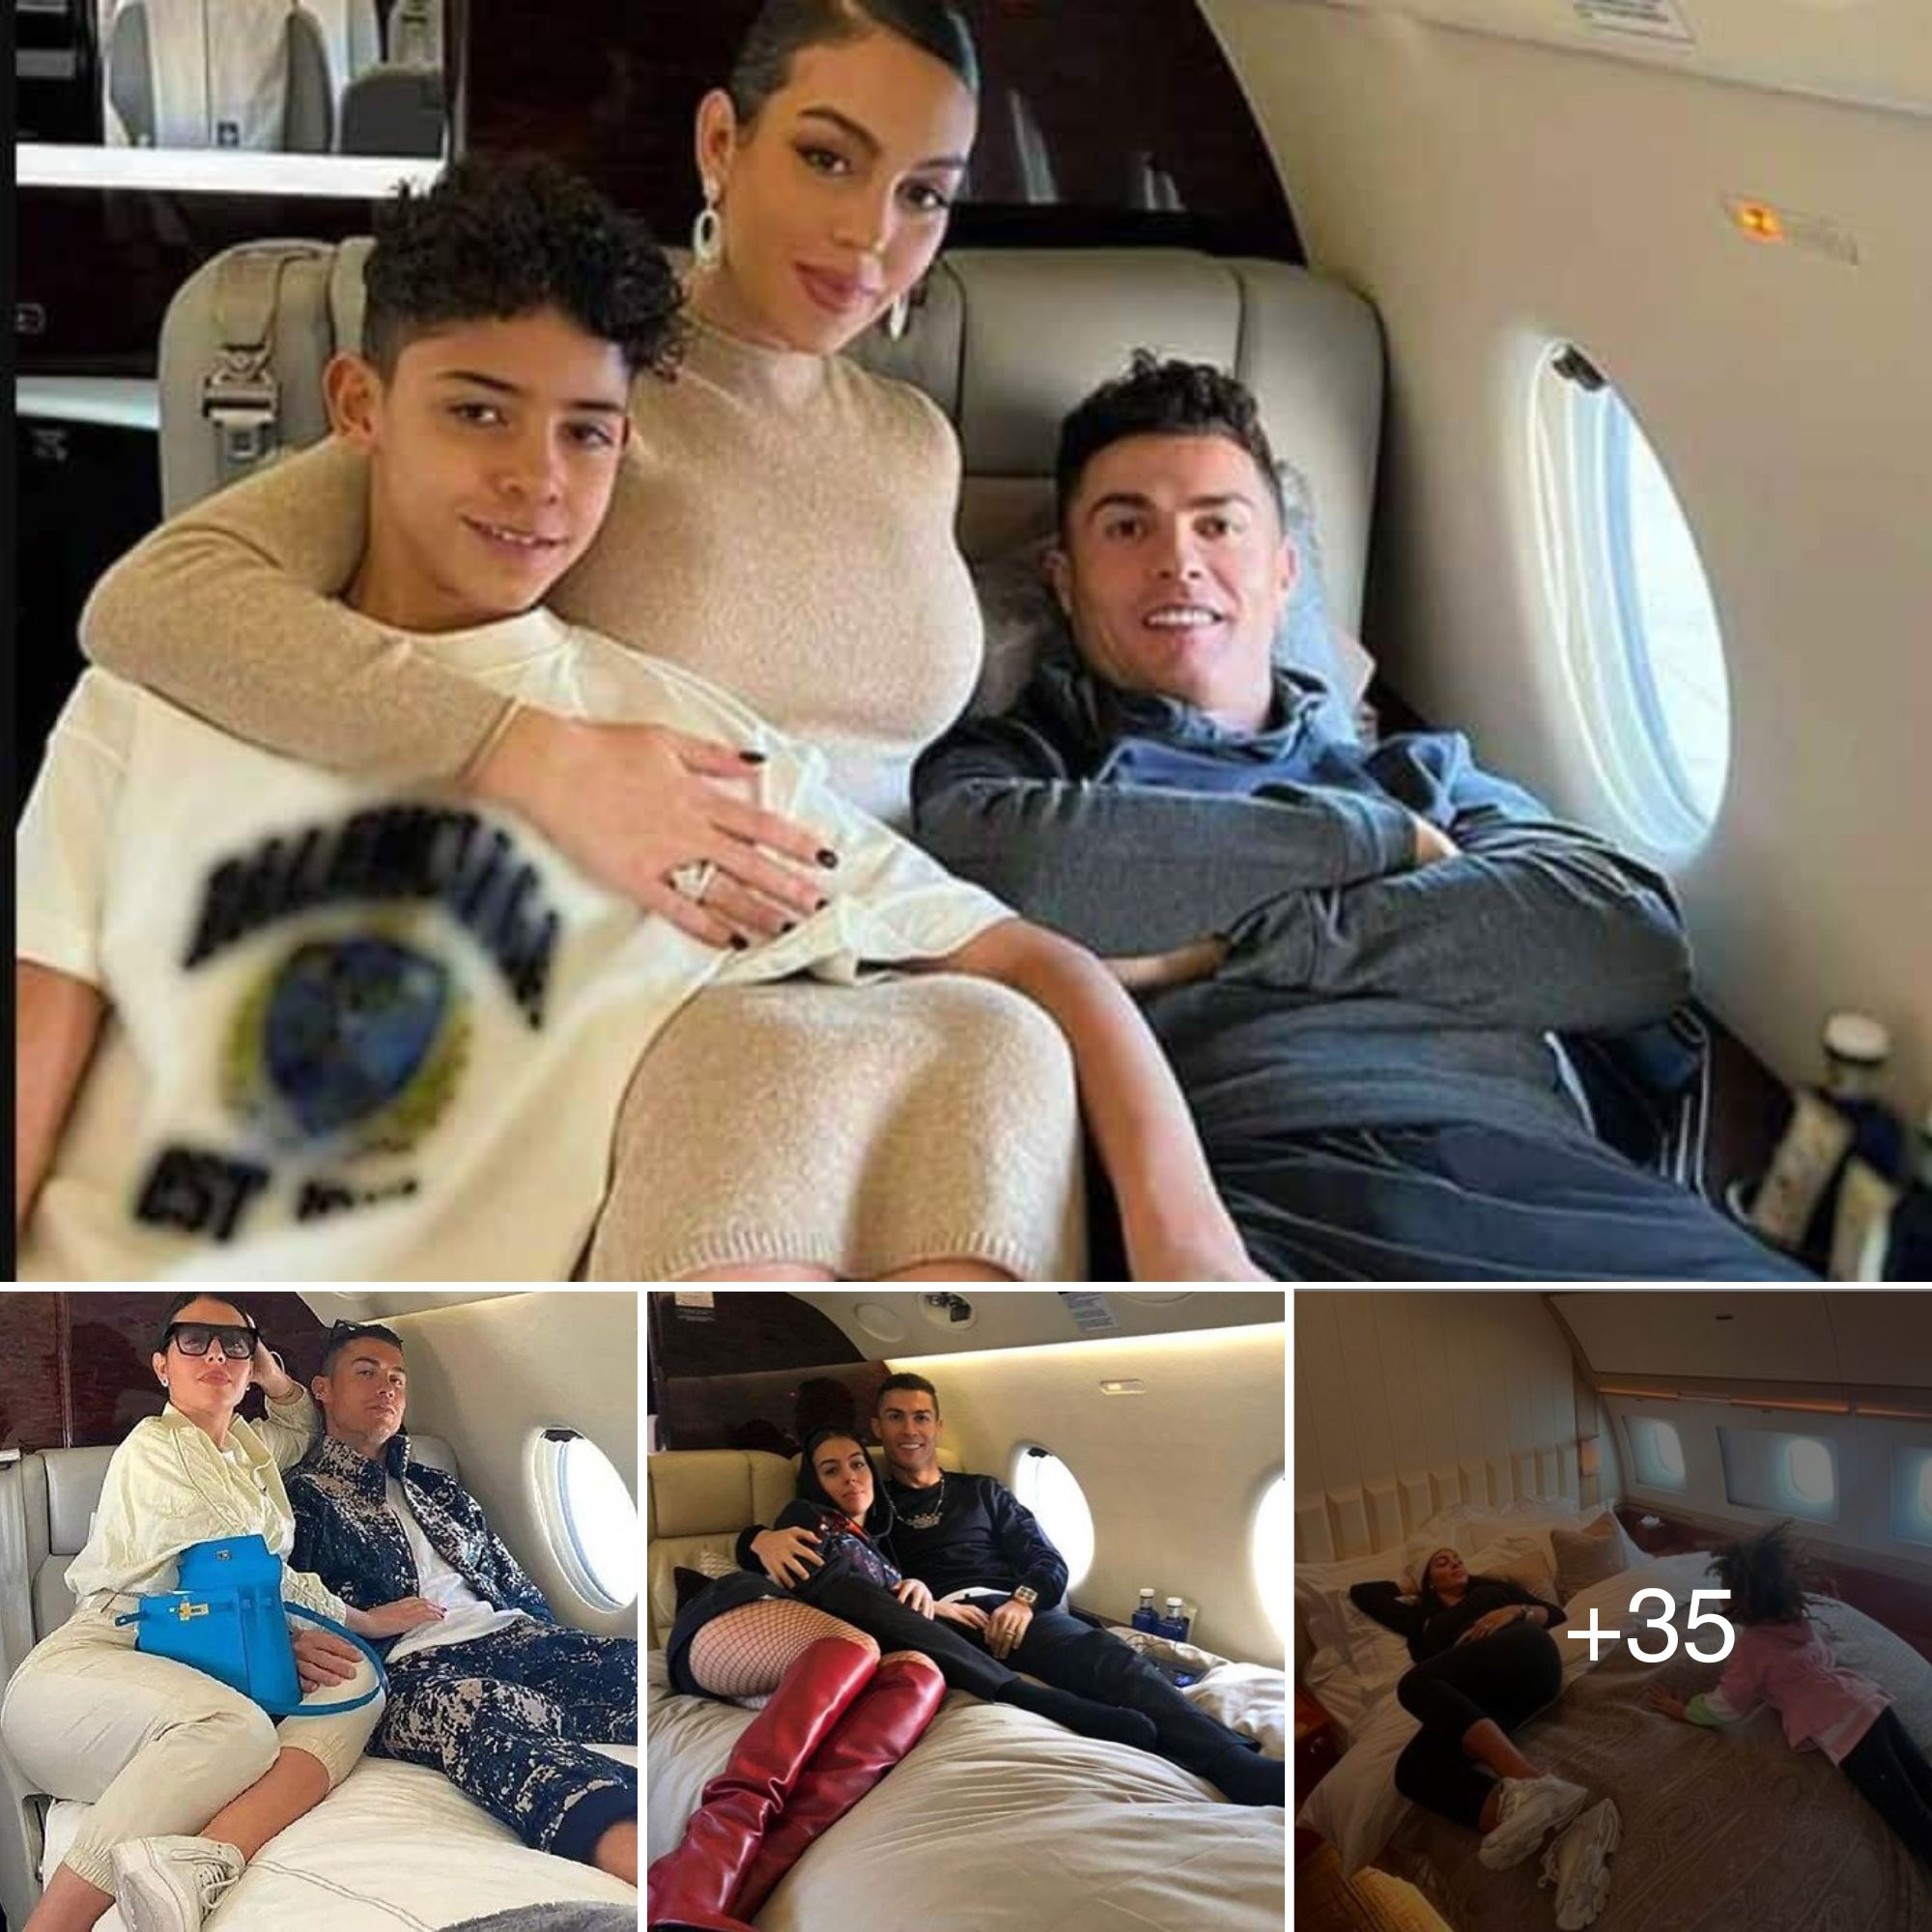 Inside the $65M private jet that carried Cristiano Ronaldo 14,000 km non-stop